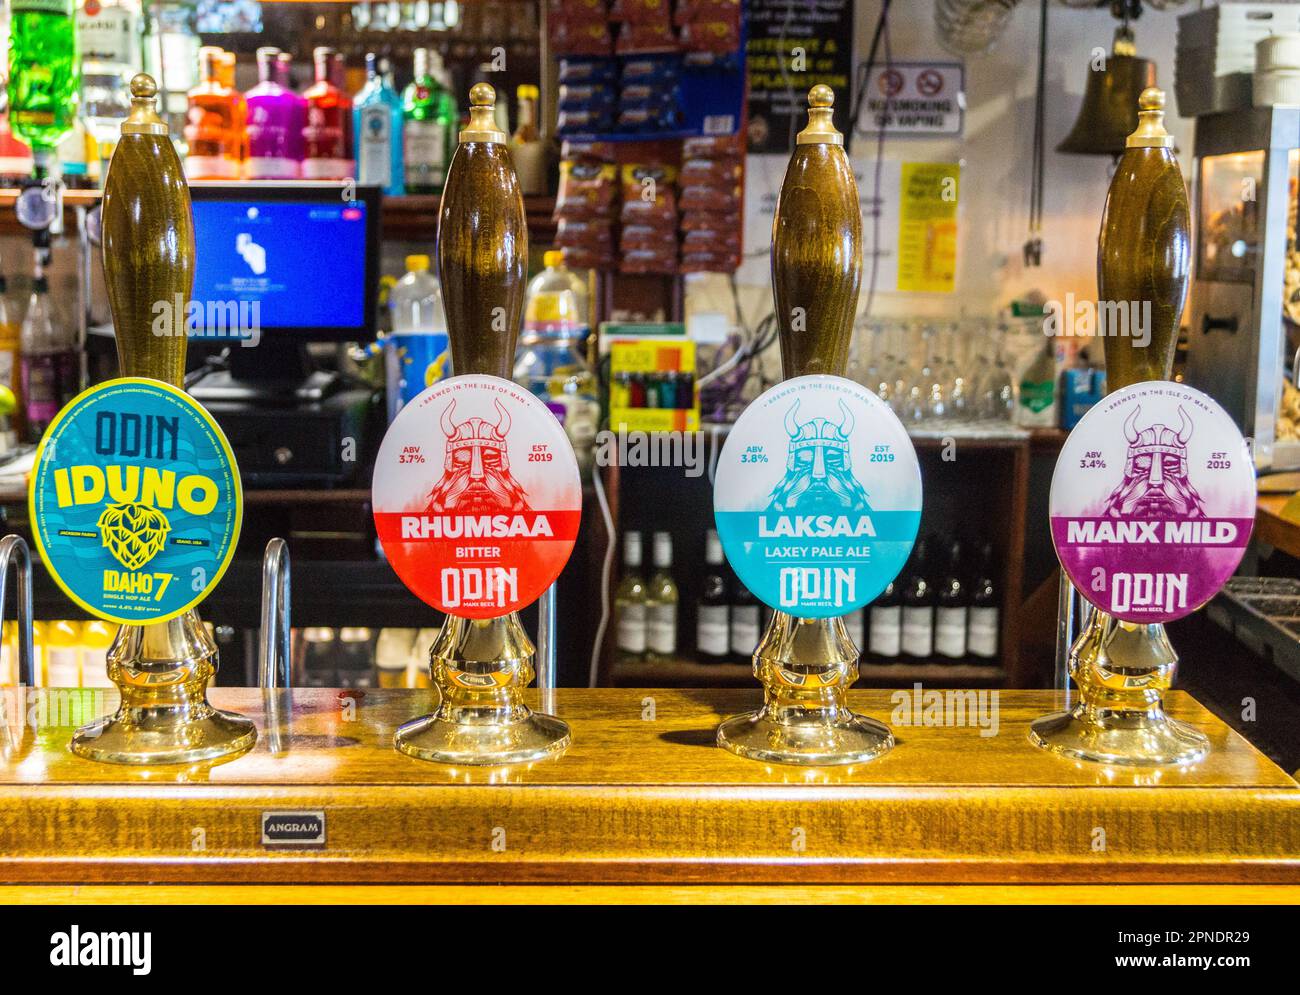 Pump clips and handpumps for Odin brewery beers, Trafalgar Hotel, Ramsey , Isle of Man Stock Photo